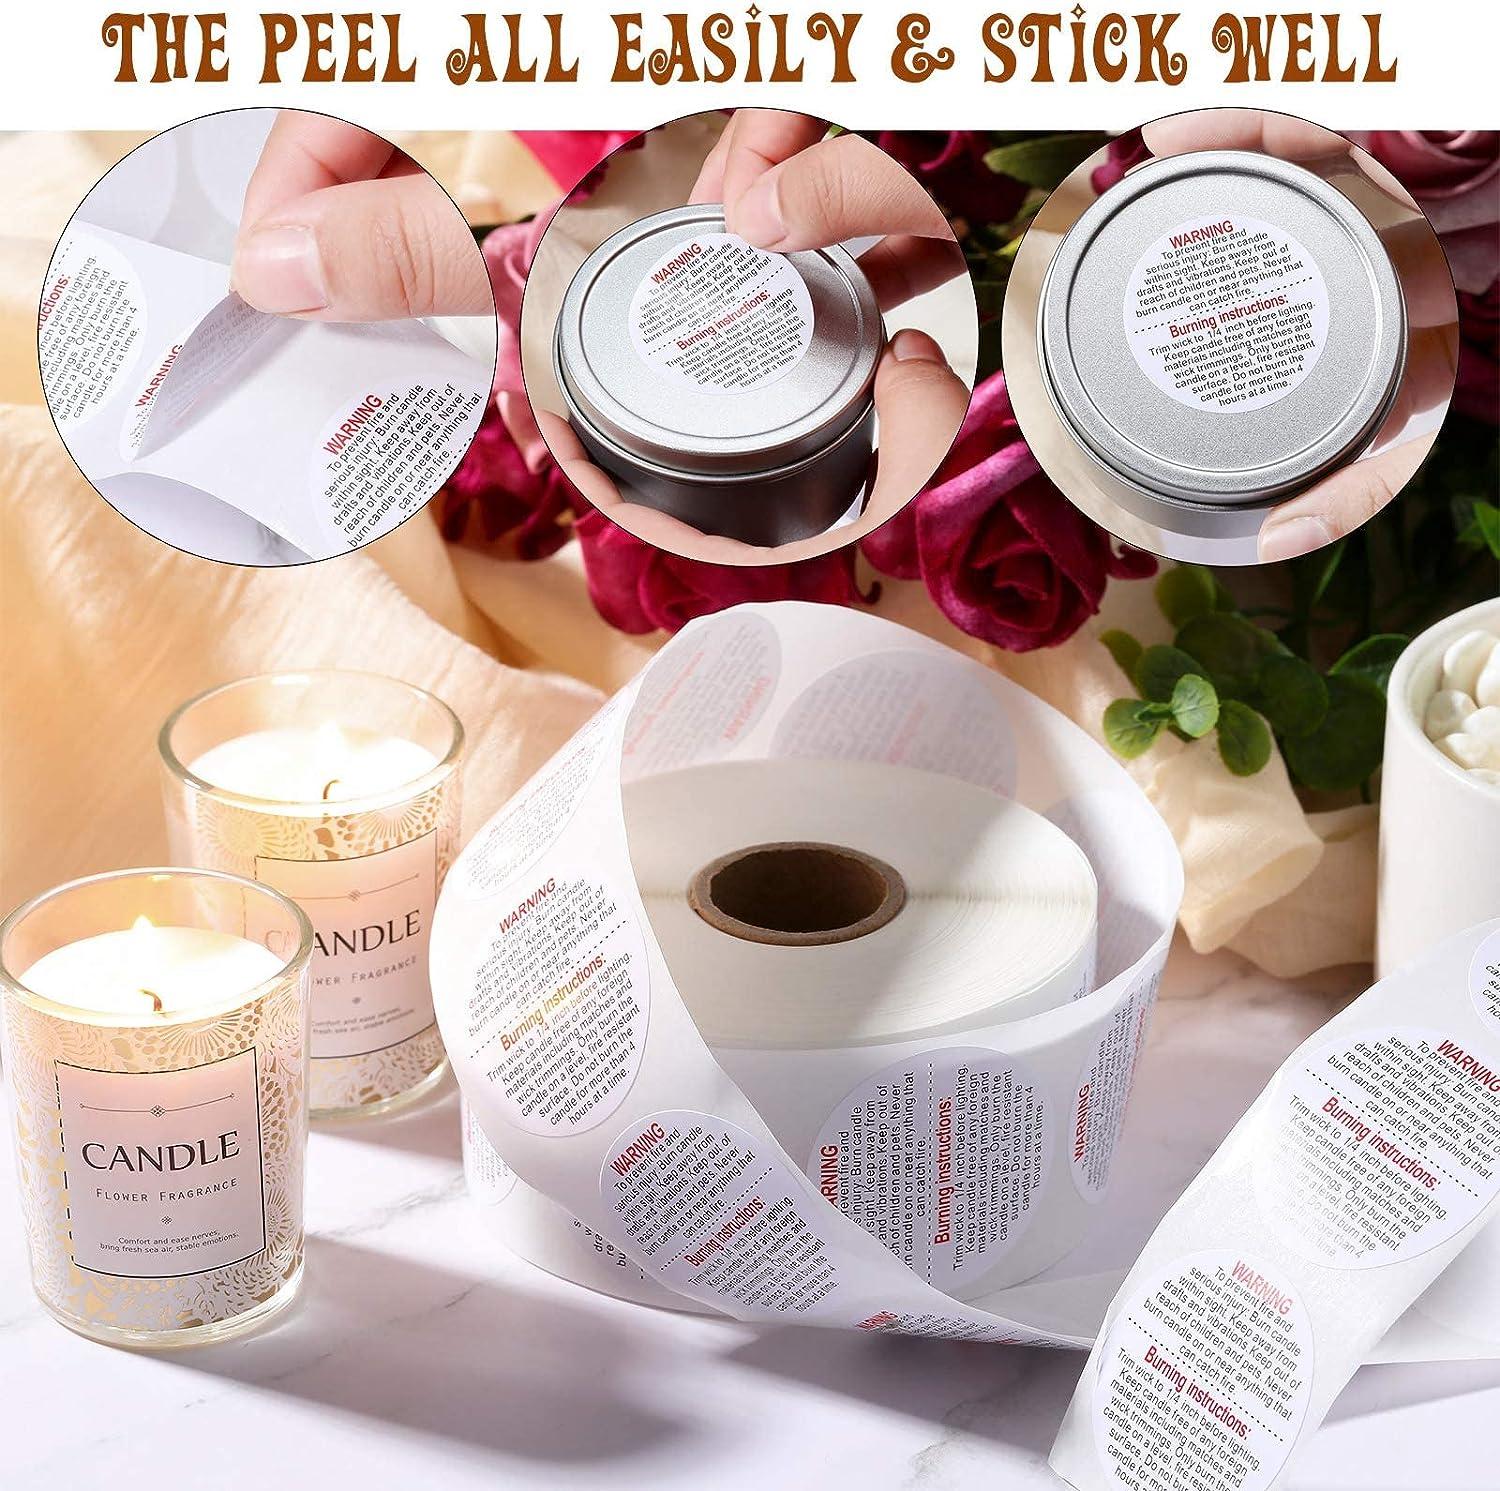 1000PCS Candle Warning Labels Stickers - Candle Jar Containers Safety  Sticker Decals for Candle Making,Soy Wax,Tins,Jars